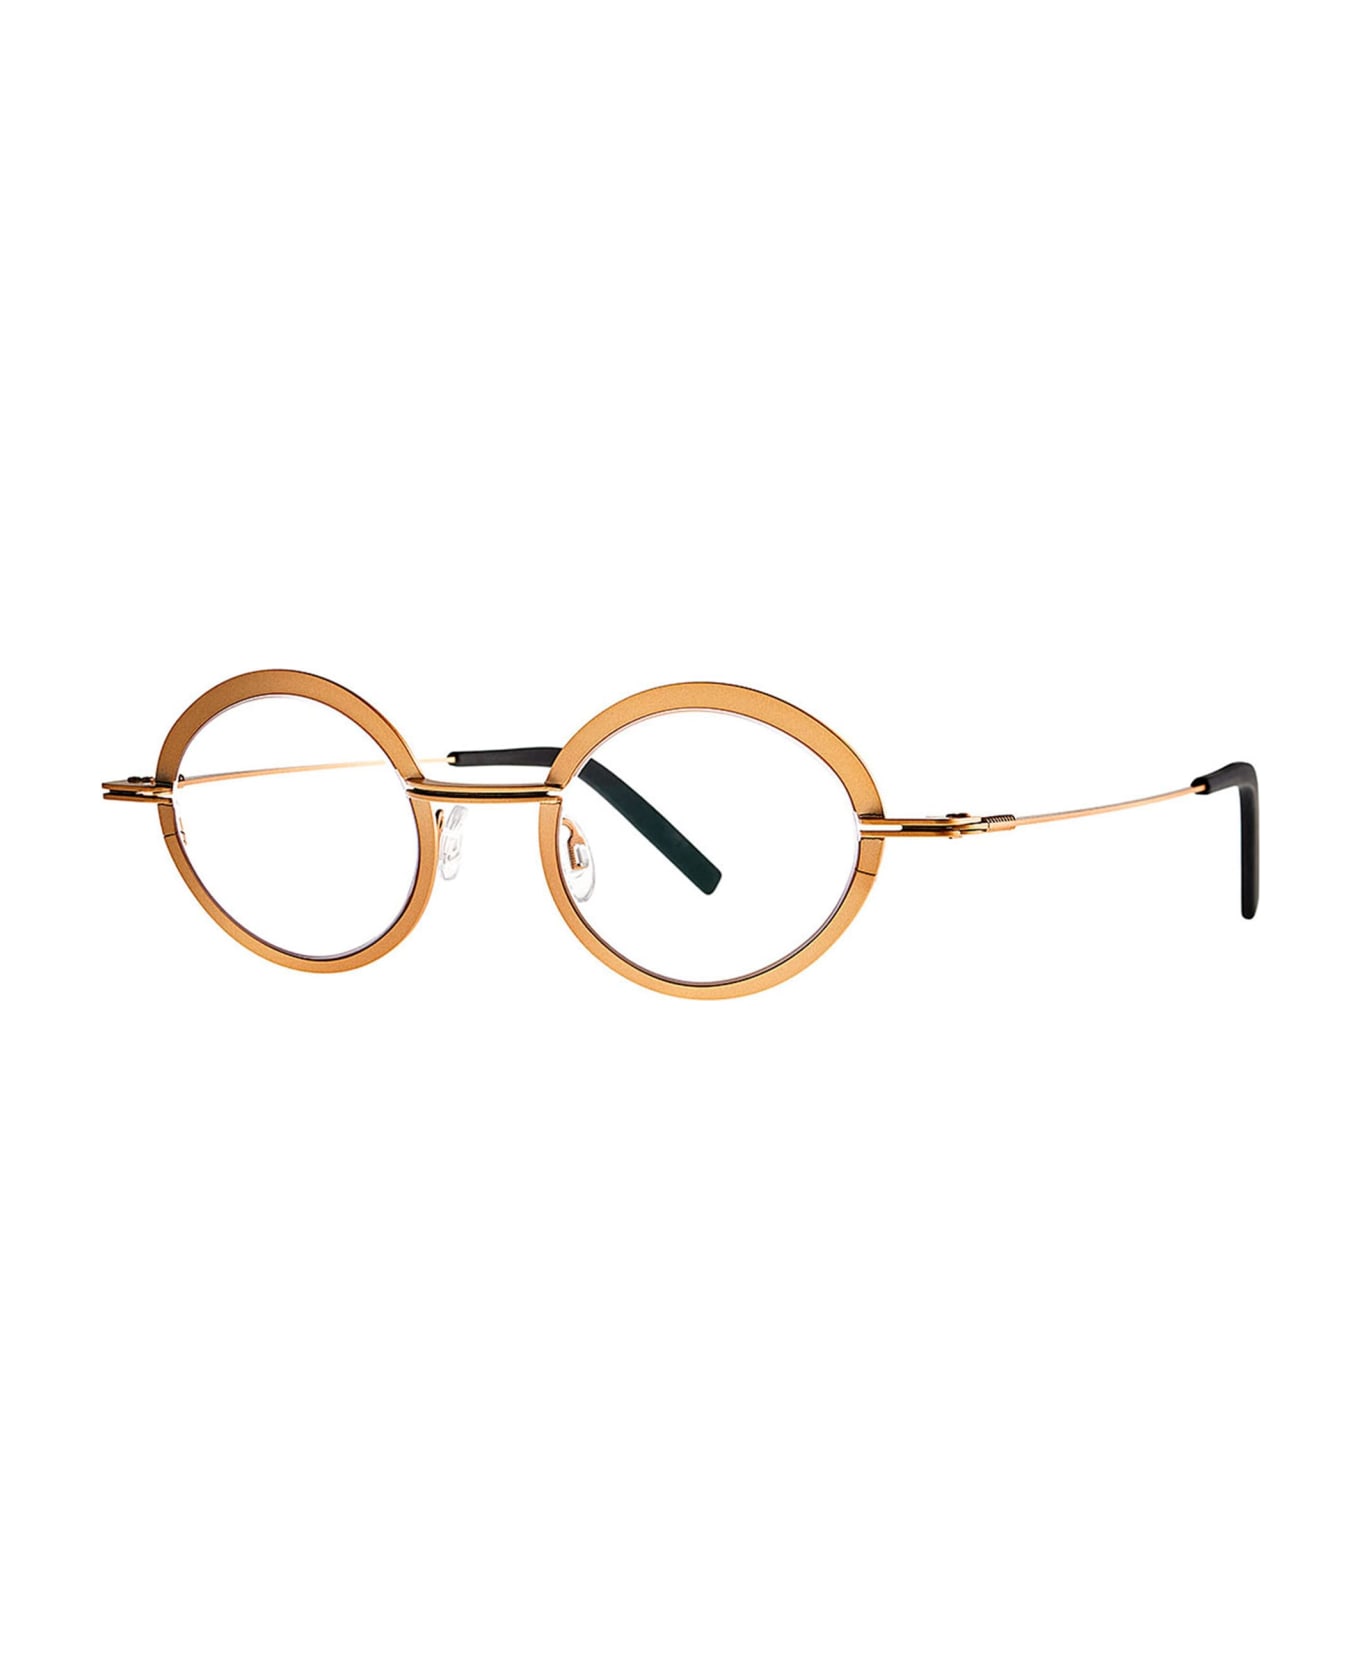 Theo Eyewear Grilled - 07 Rx Glasses - Gold